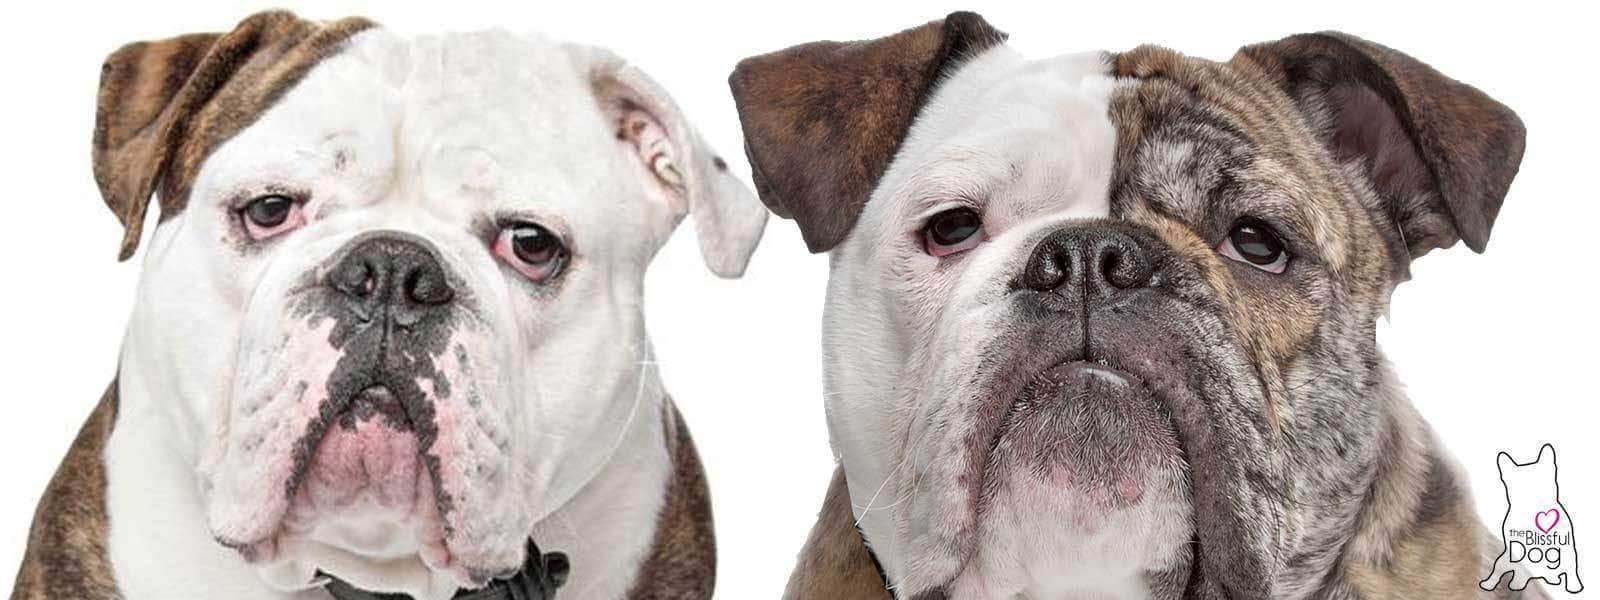 The Olde English Bulldogge History - The Realization of a Dream